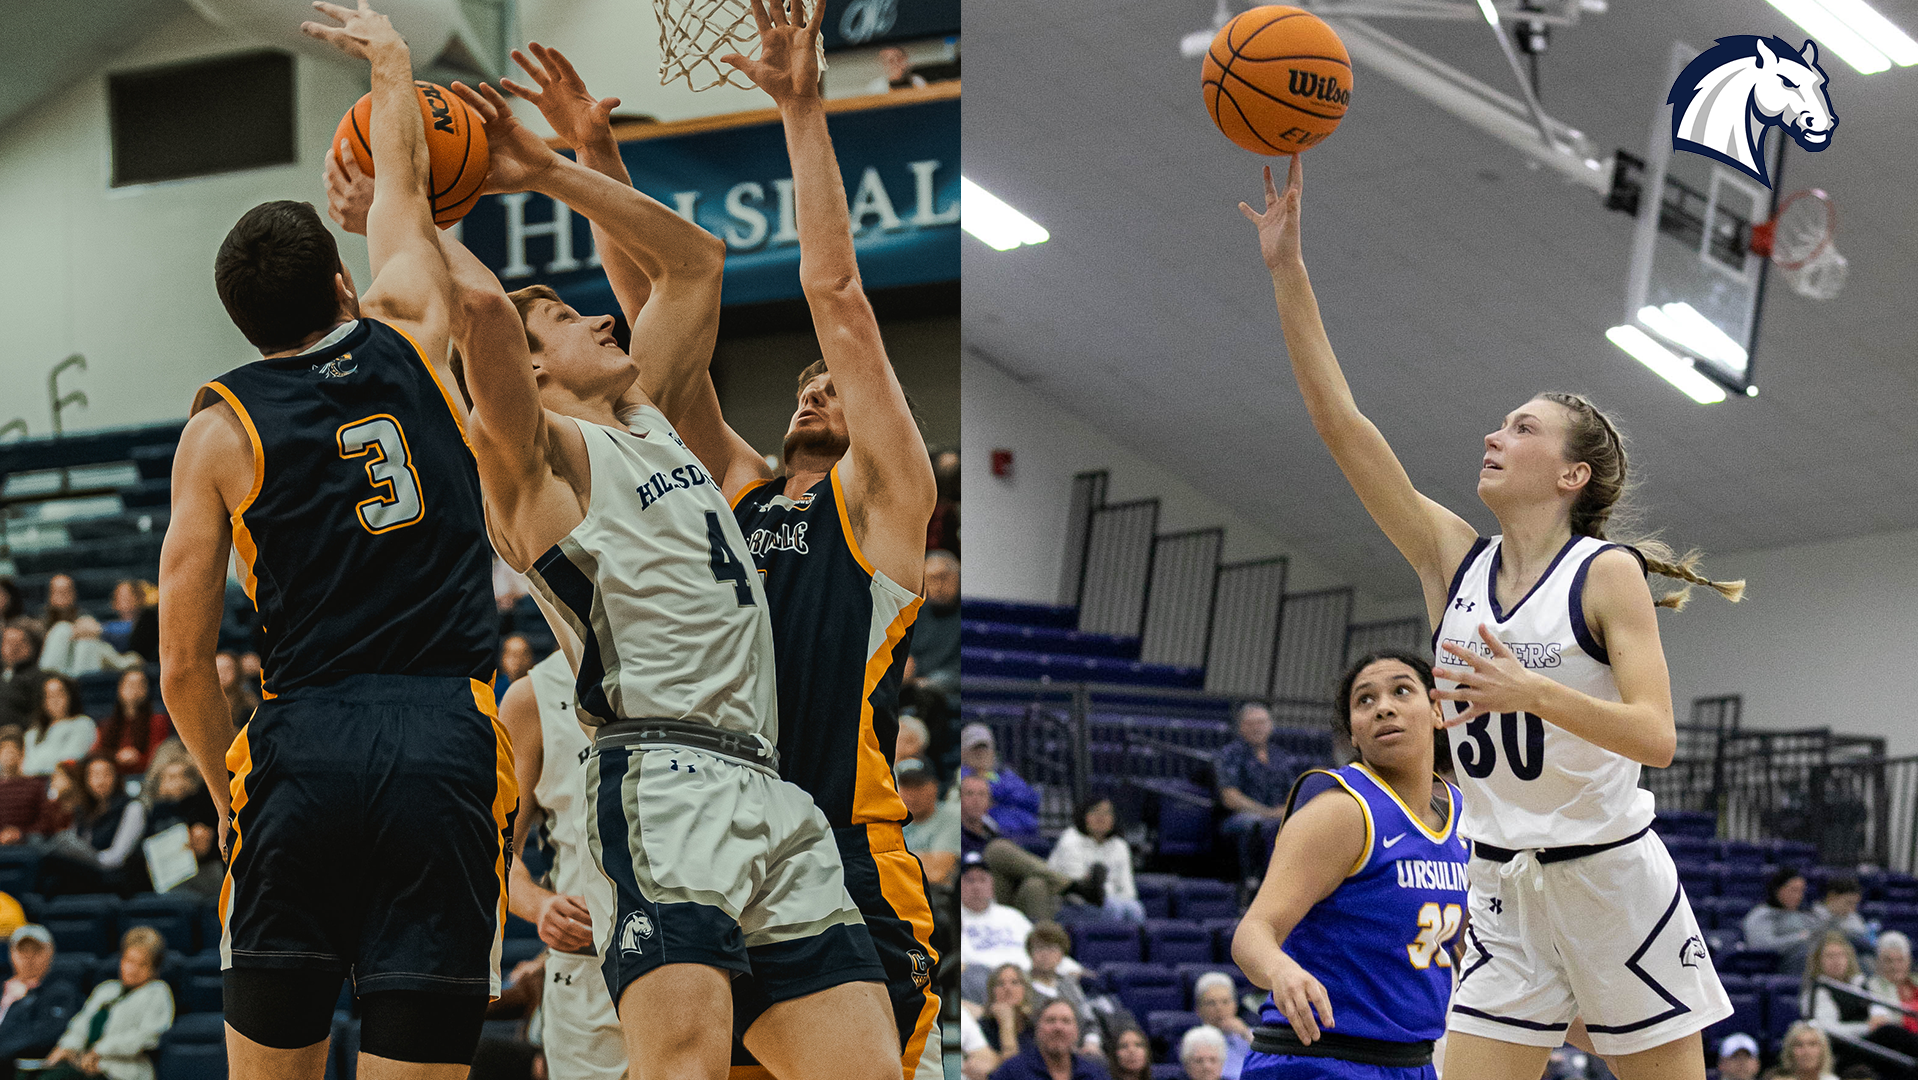 Charger women, men each earn five seed in G-MAC Tourney; travel to Thomas More on Tuesday